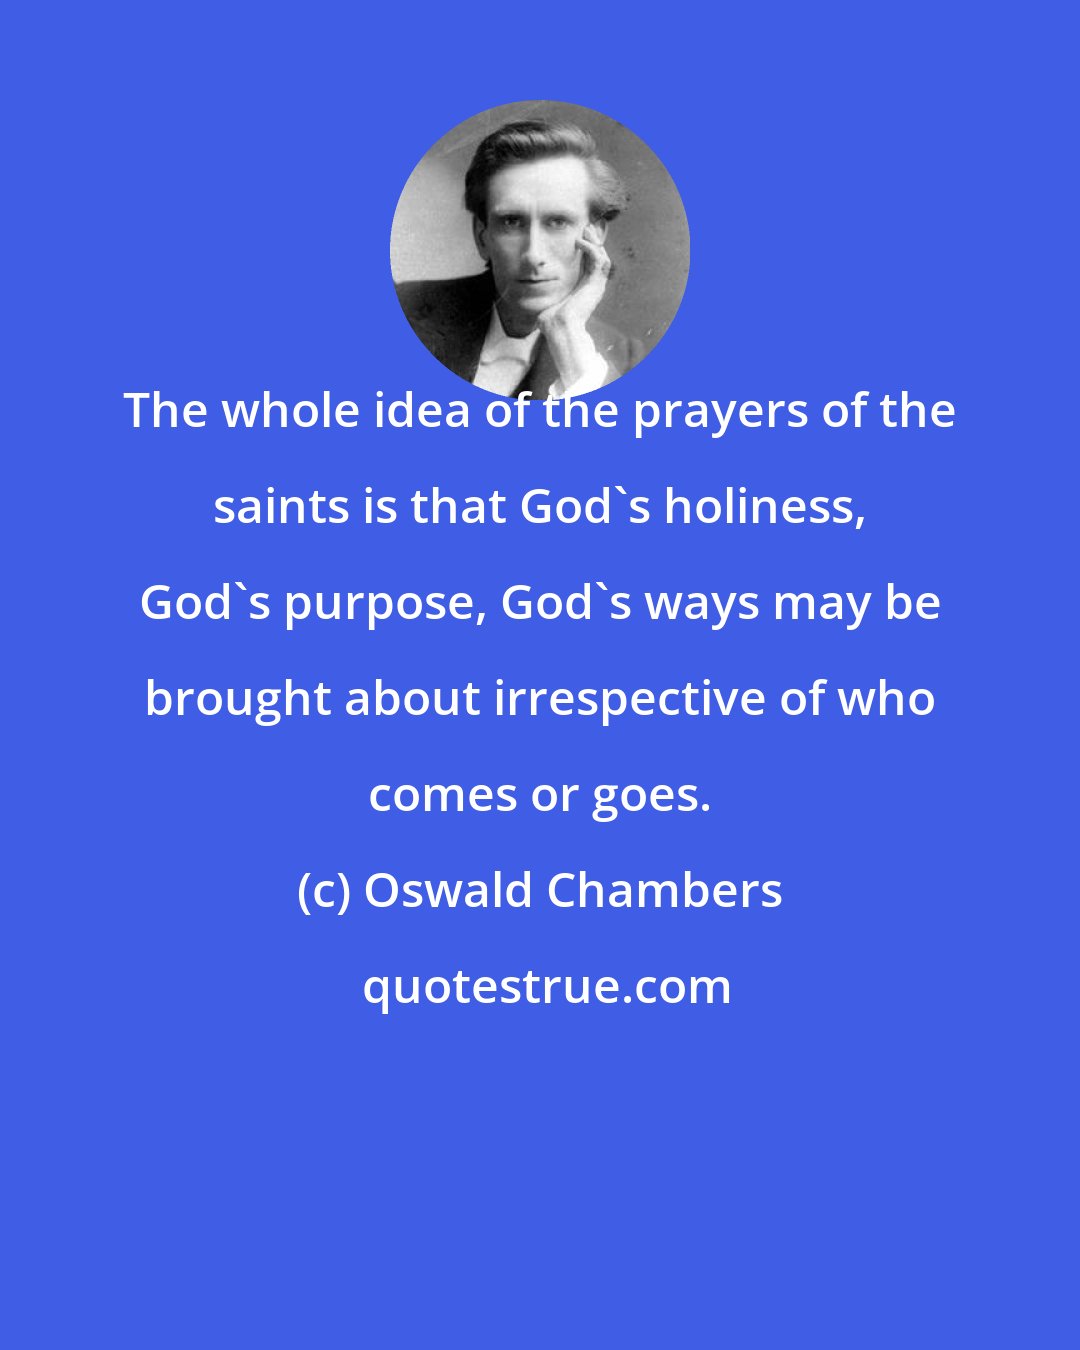 Oswald Chambers: The whole idea of the prayers of the saints is that God's holiness, God's purpose, God's ways may be brought about irrespective of who comes or goes.